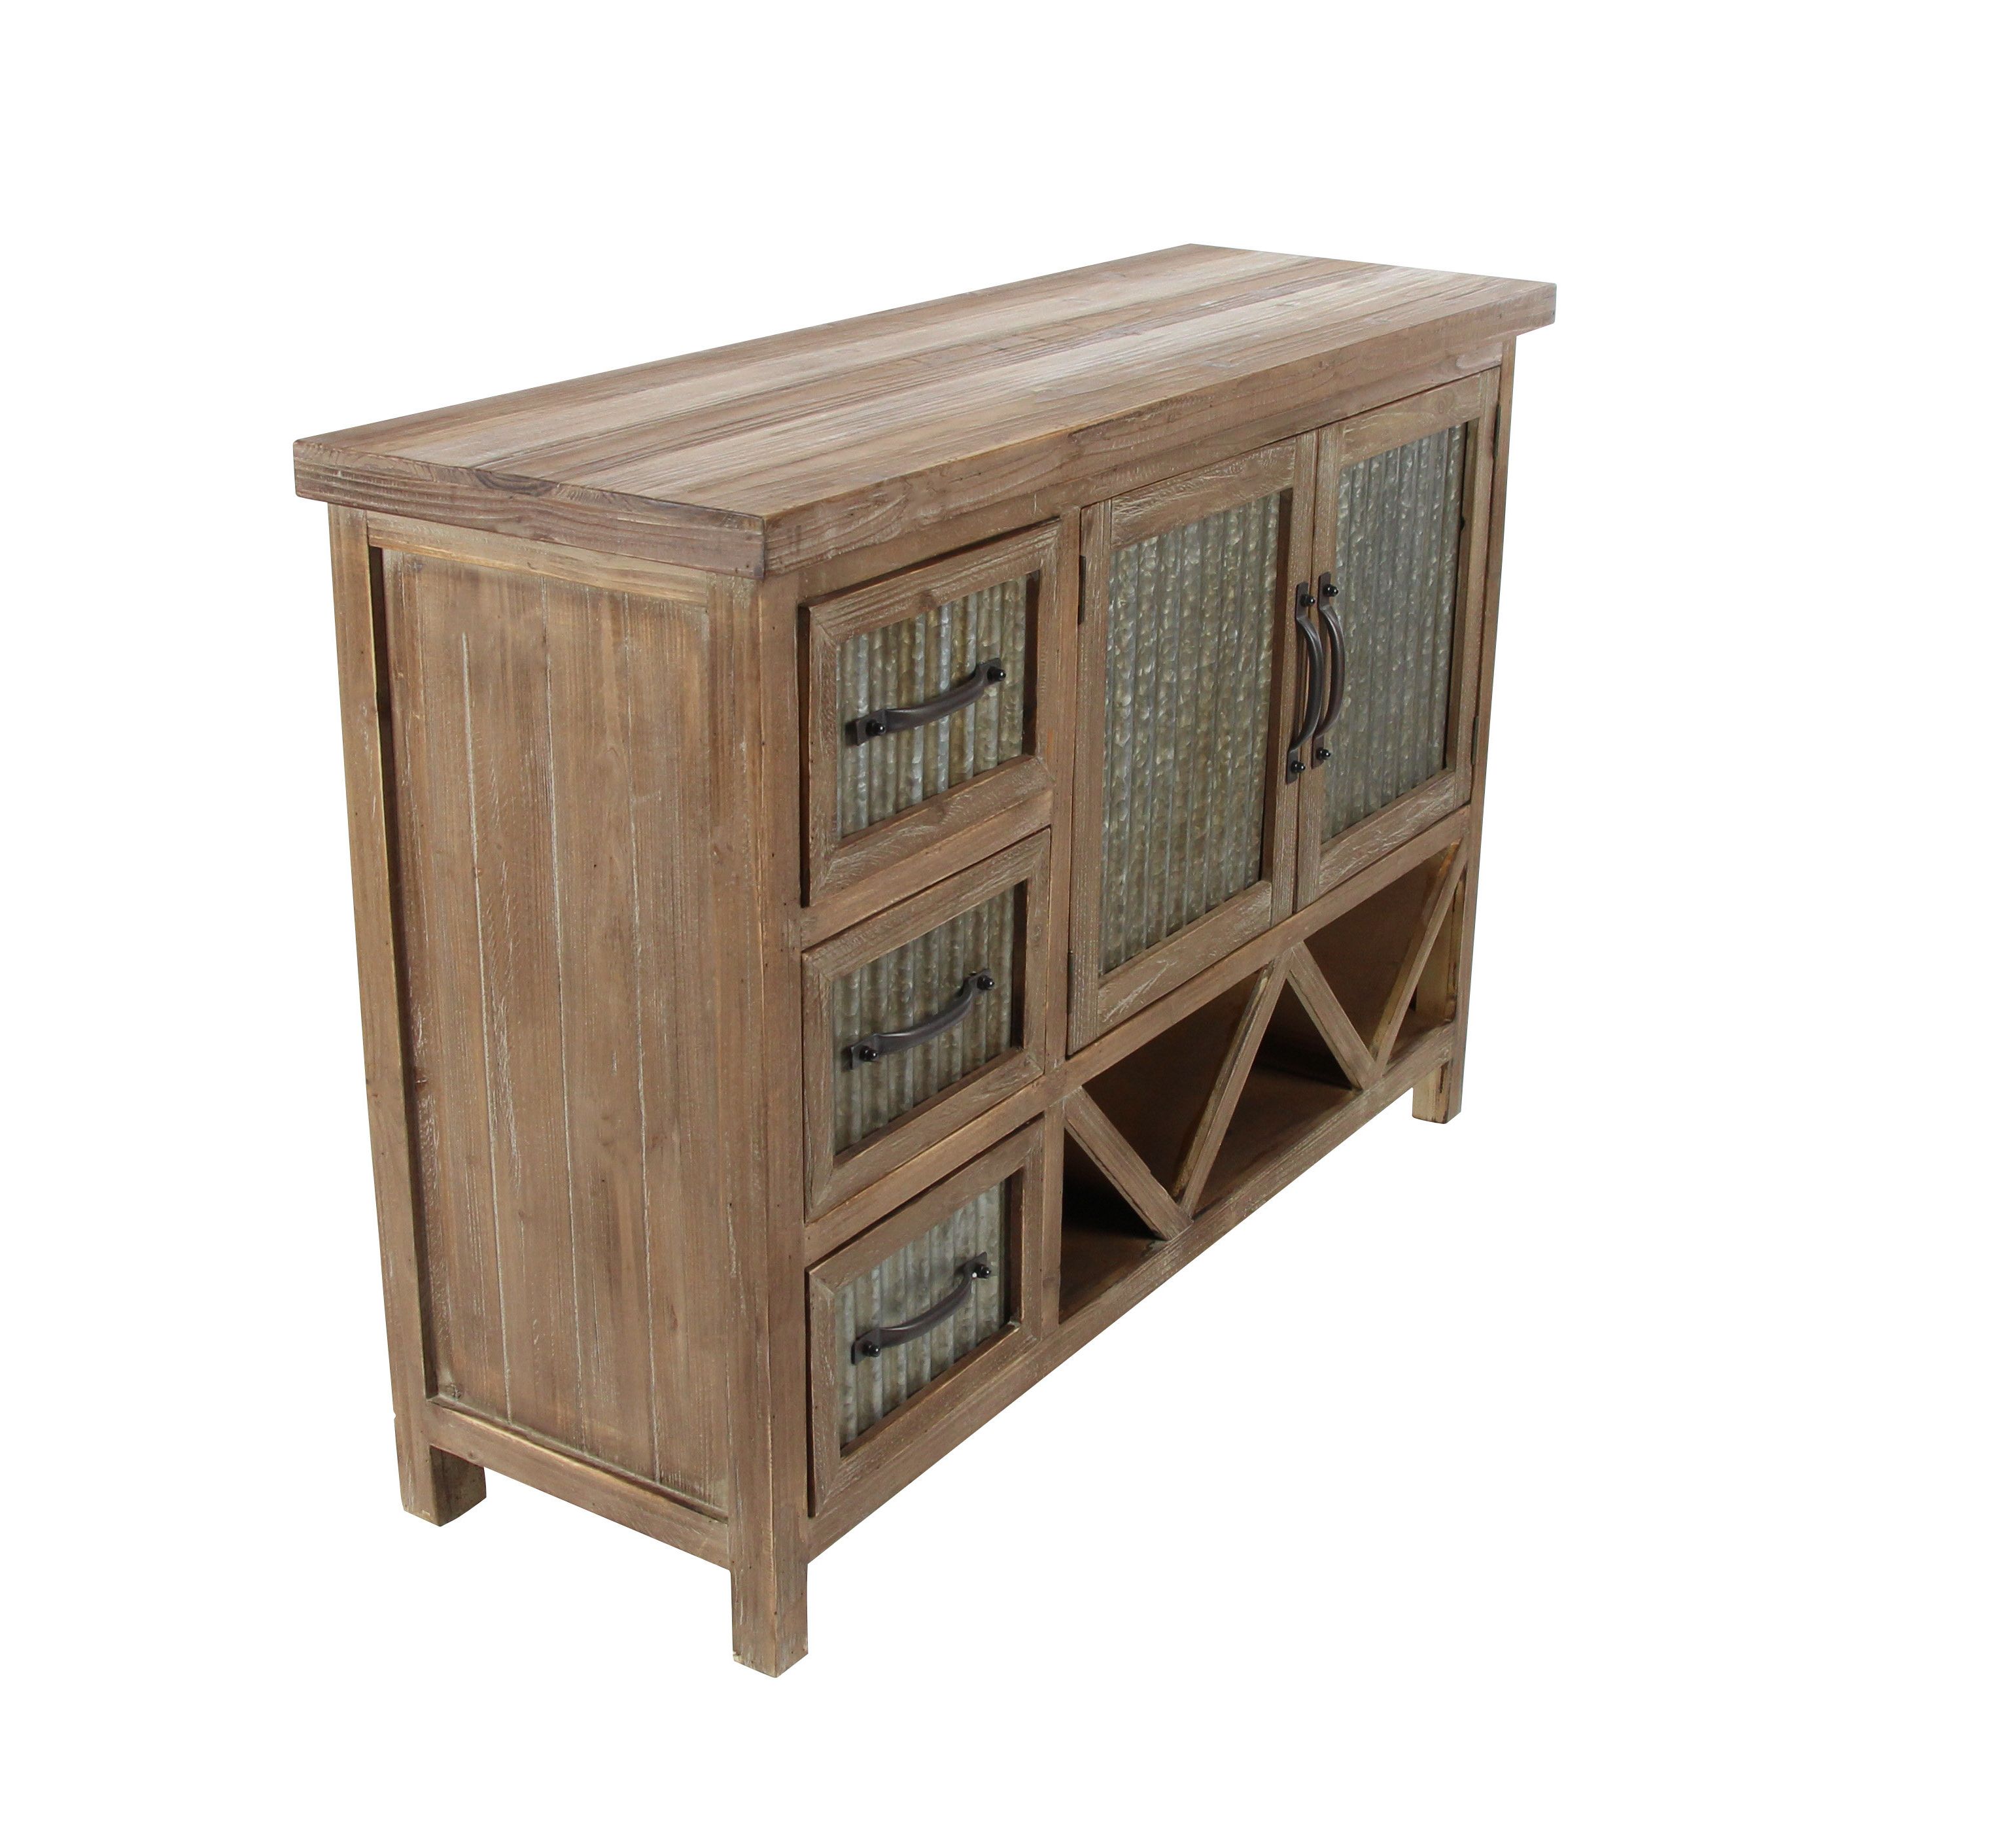 Wayfair With Corrugated Natural 6 Door Sideboards (View 3 of 20)